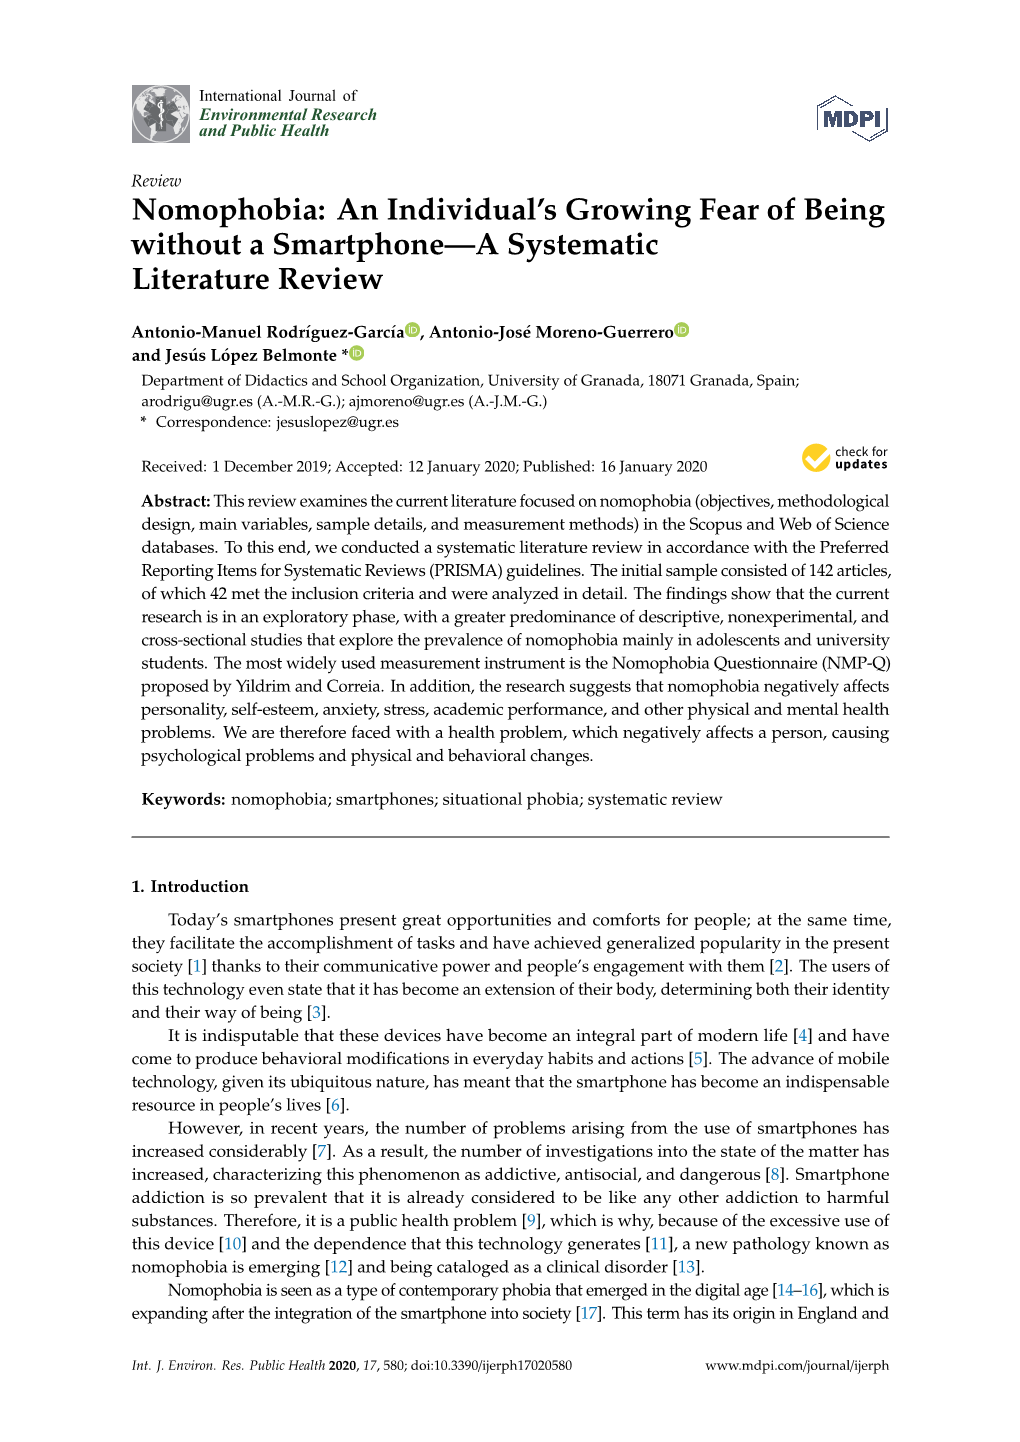 Nomophobia: an Individual’S Growing Fear of Being Without a Smartphone—A Systematic Literature Review